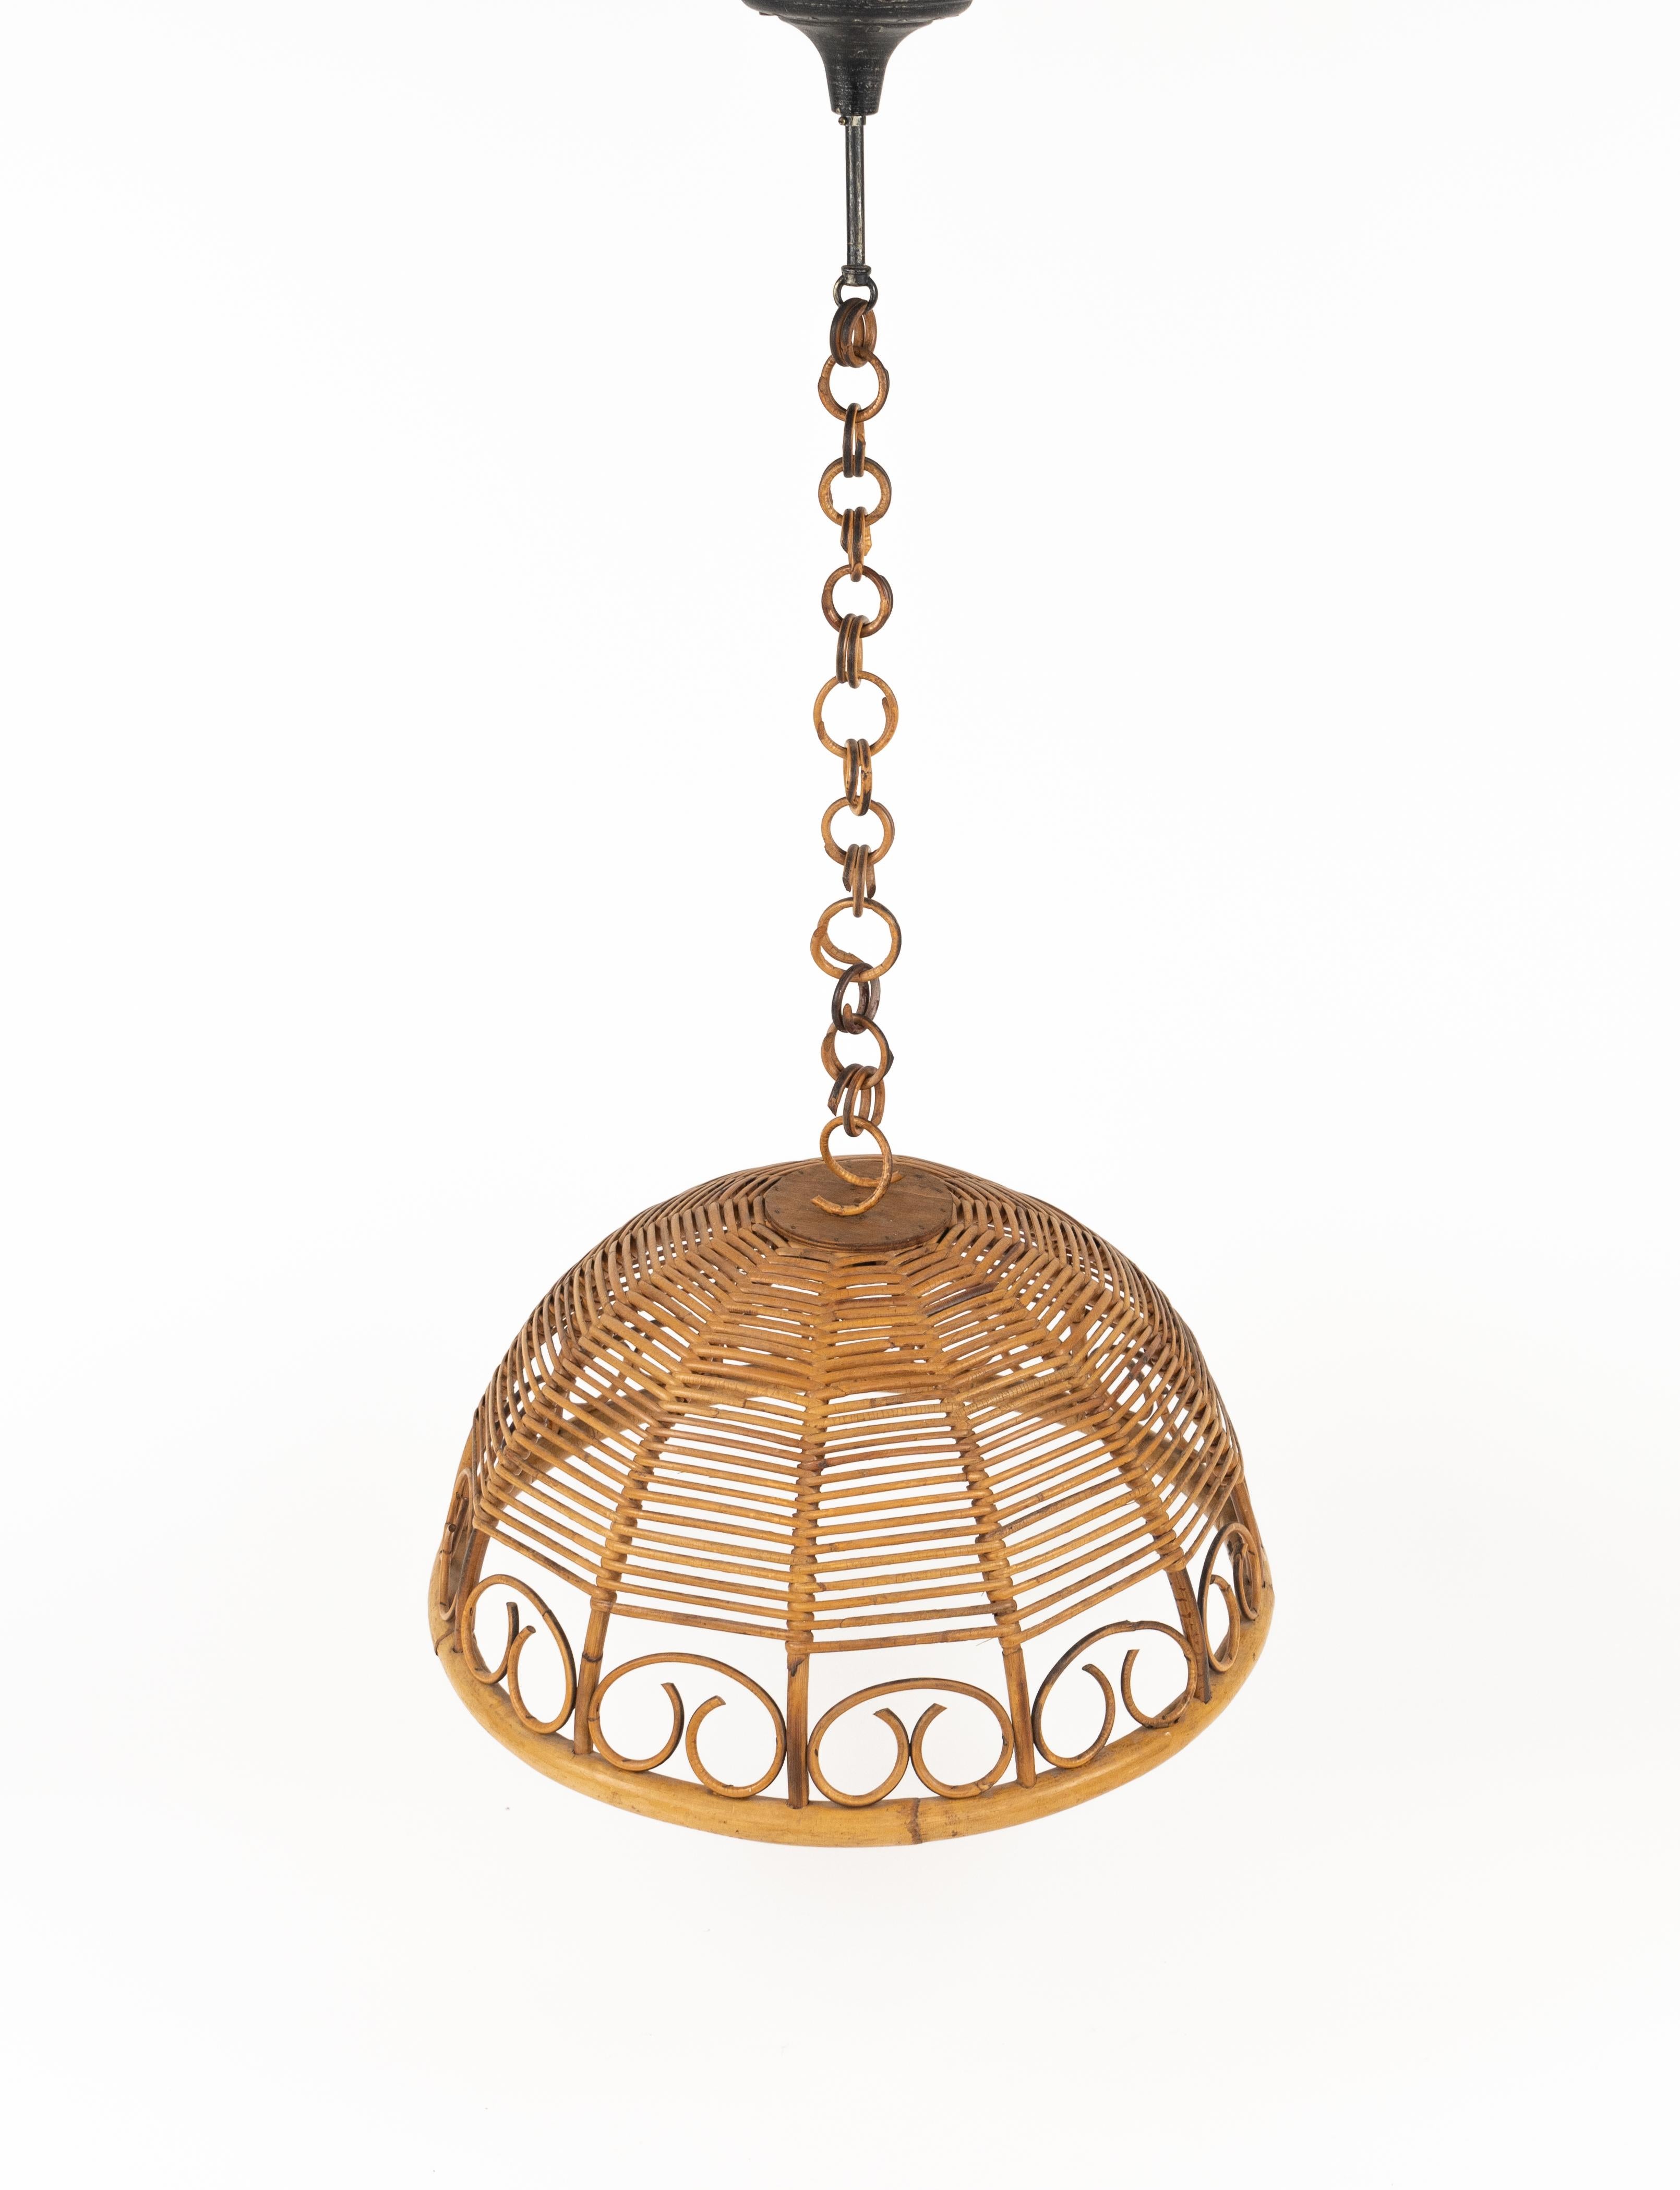 Midcentury beautiful handcrafted chandelier in rattan and bamboo with chain in rattan.

Made in Italy in the 1960s.  

It will be gorgeous hanging over a kitchen's table or dining area but also placed in a bedroom or bathroom to add a fresh